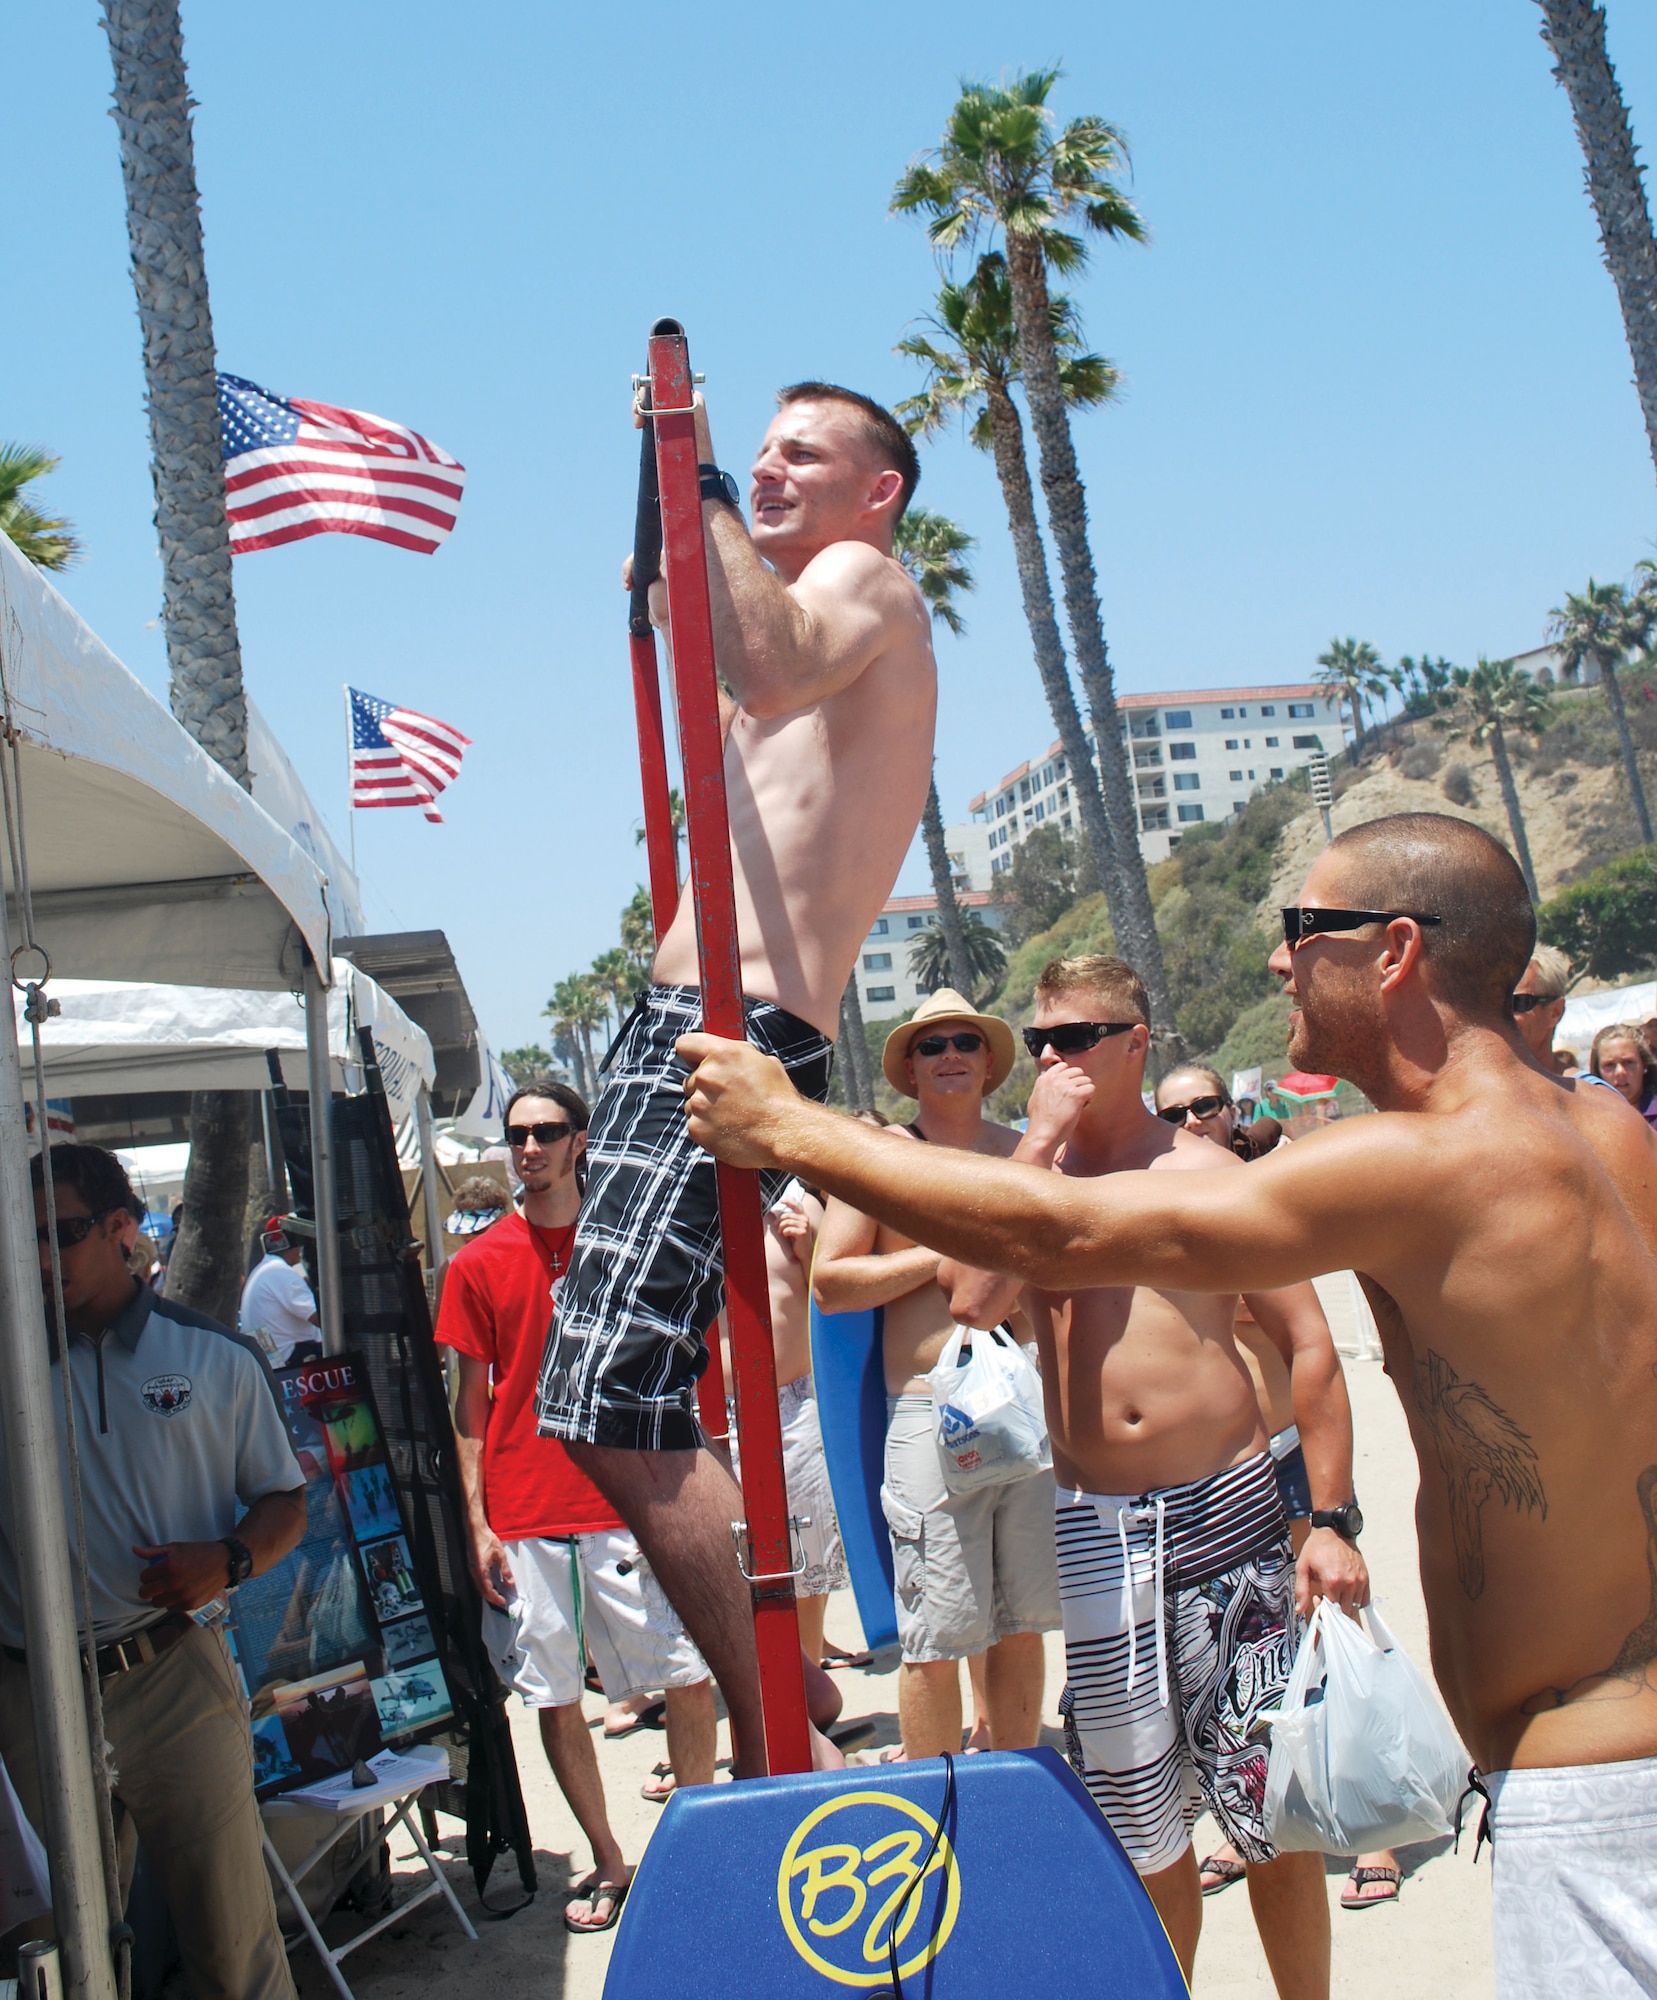 Beach-goers pause to do pull-ups at the pararescue recruiting booth at the San Clemente Ocean Festival, Aug. 18. Recruiters from March ARB teamed up with Tuscon, Ariz. recruiters for the event. (U.S. Air Force courtesy photo)